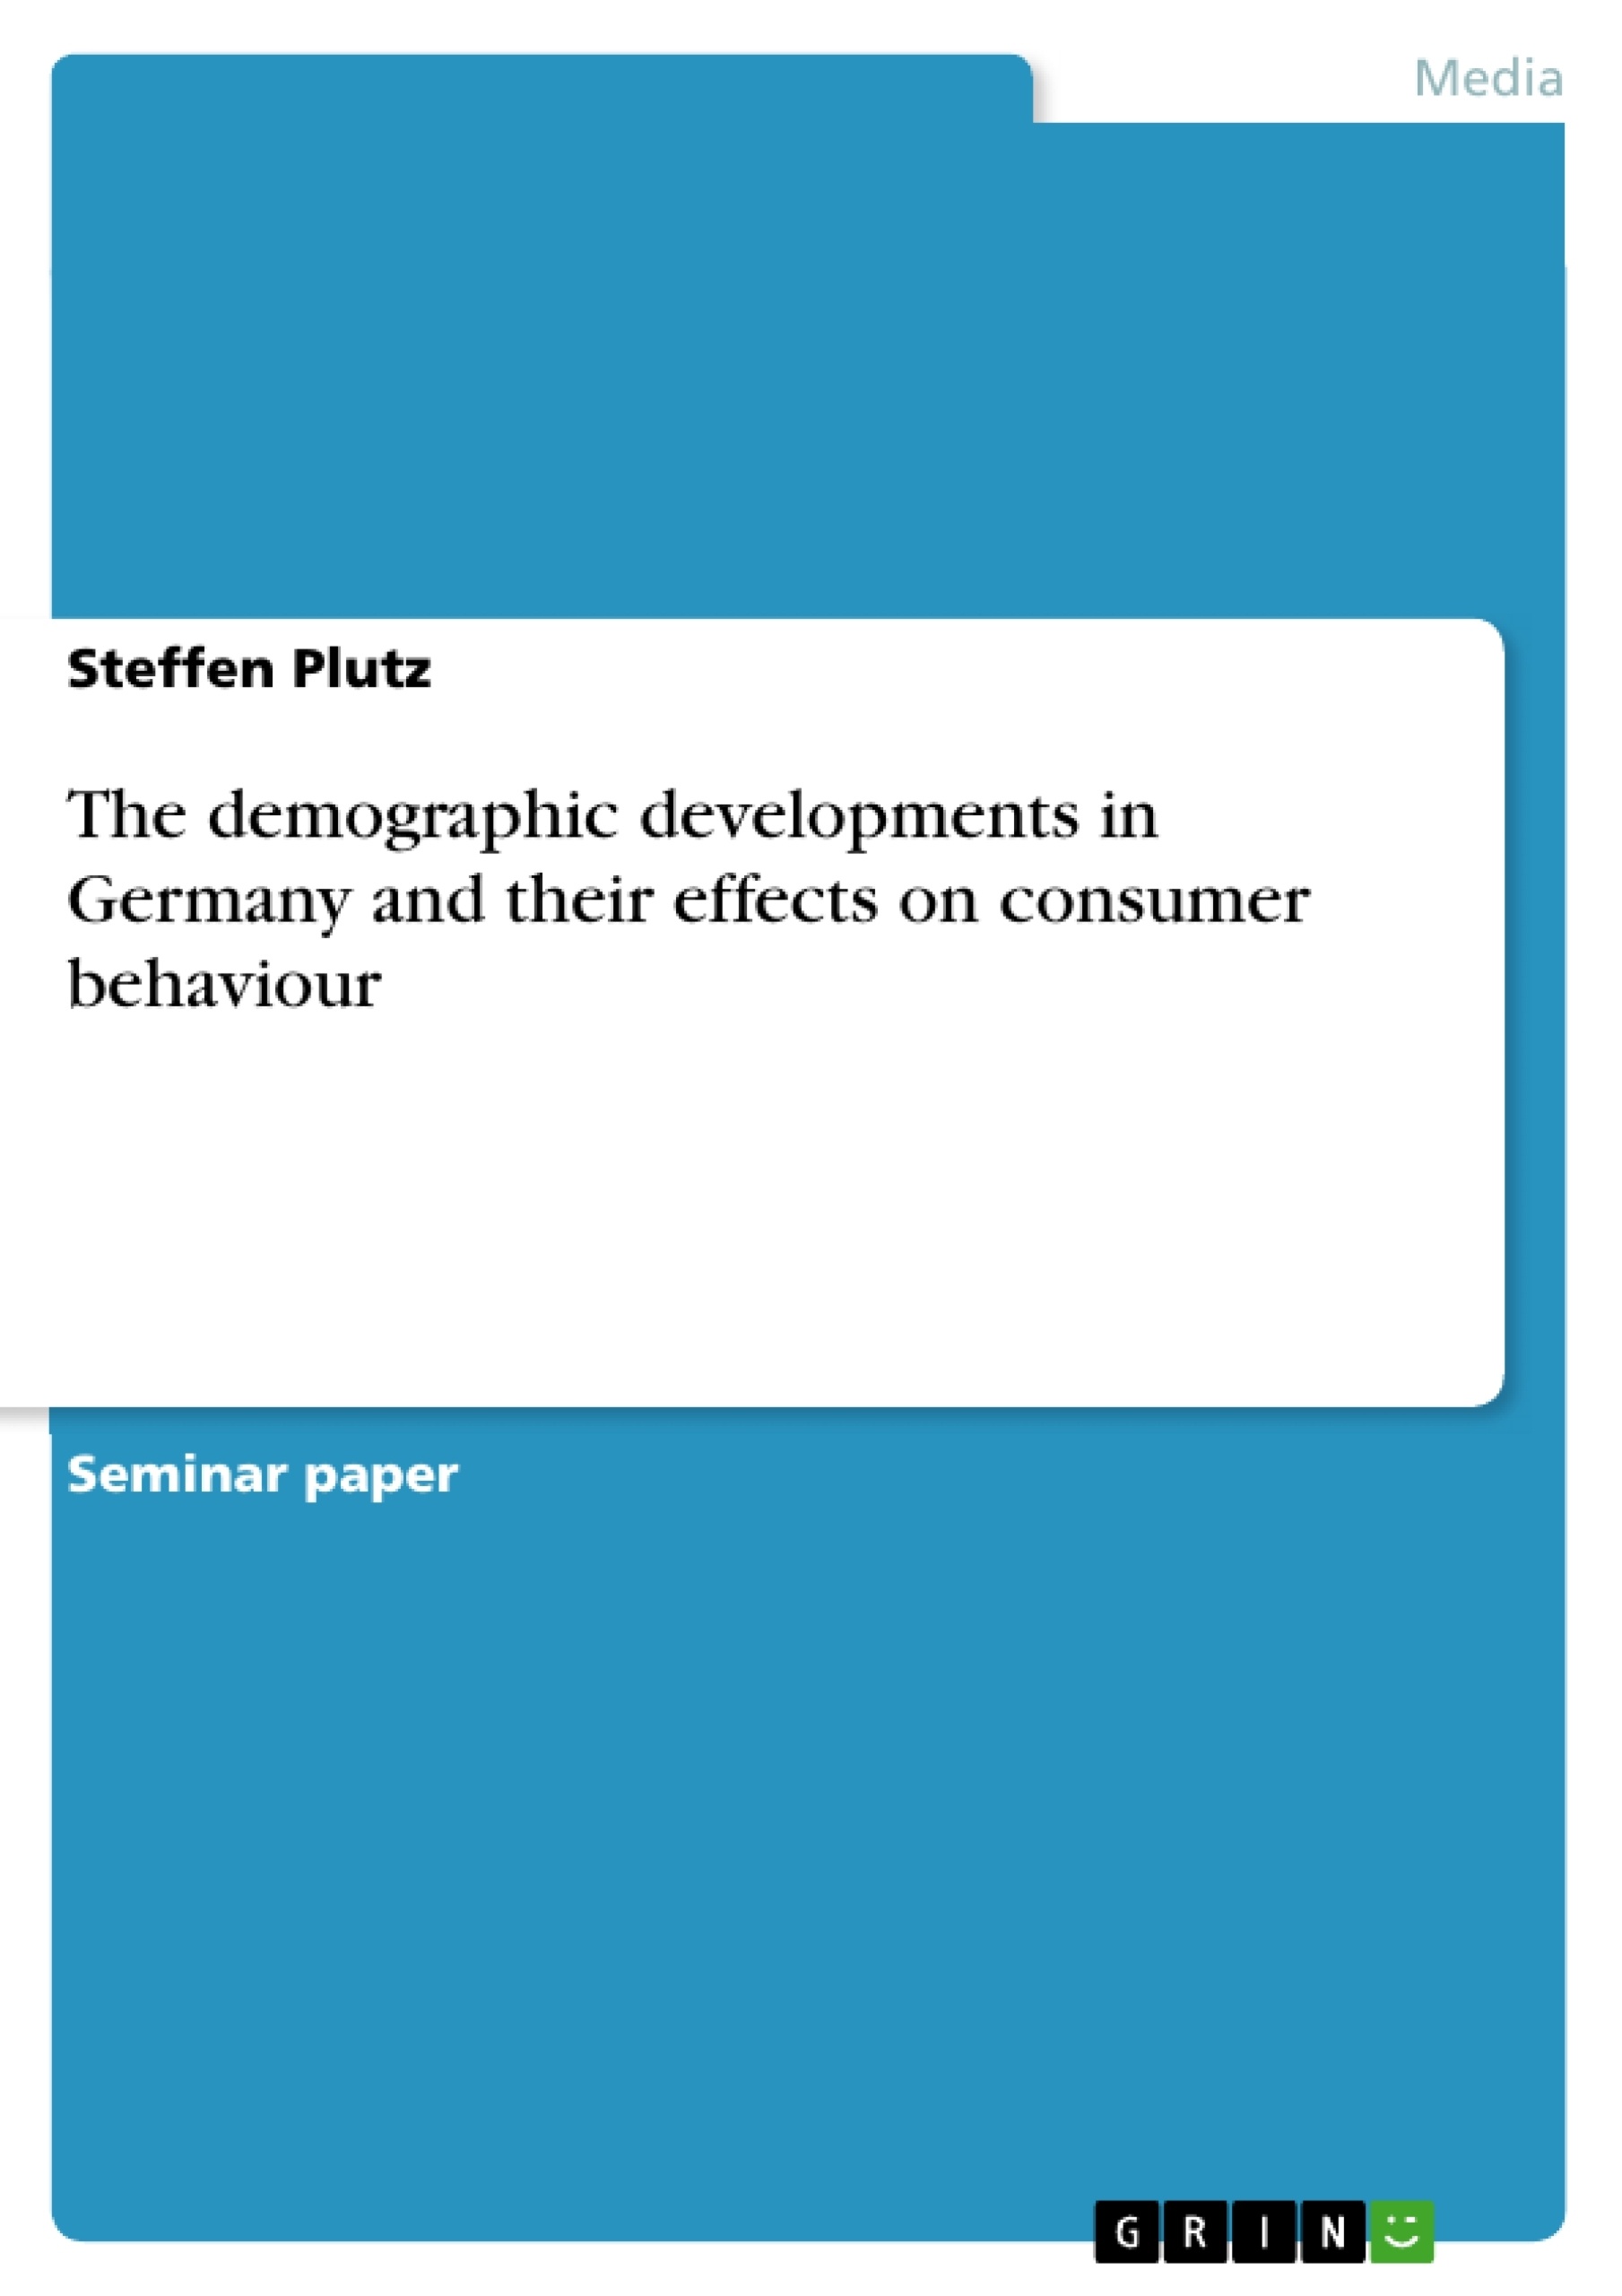 Title: The demographic developments in Germany and their effects on consumer behaviour